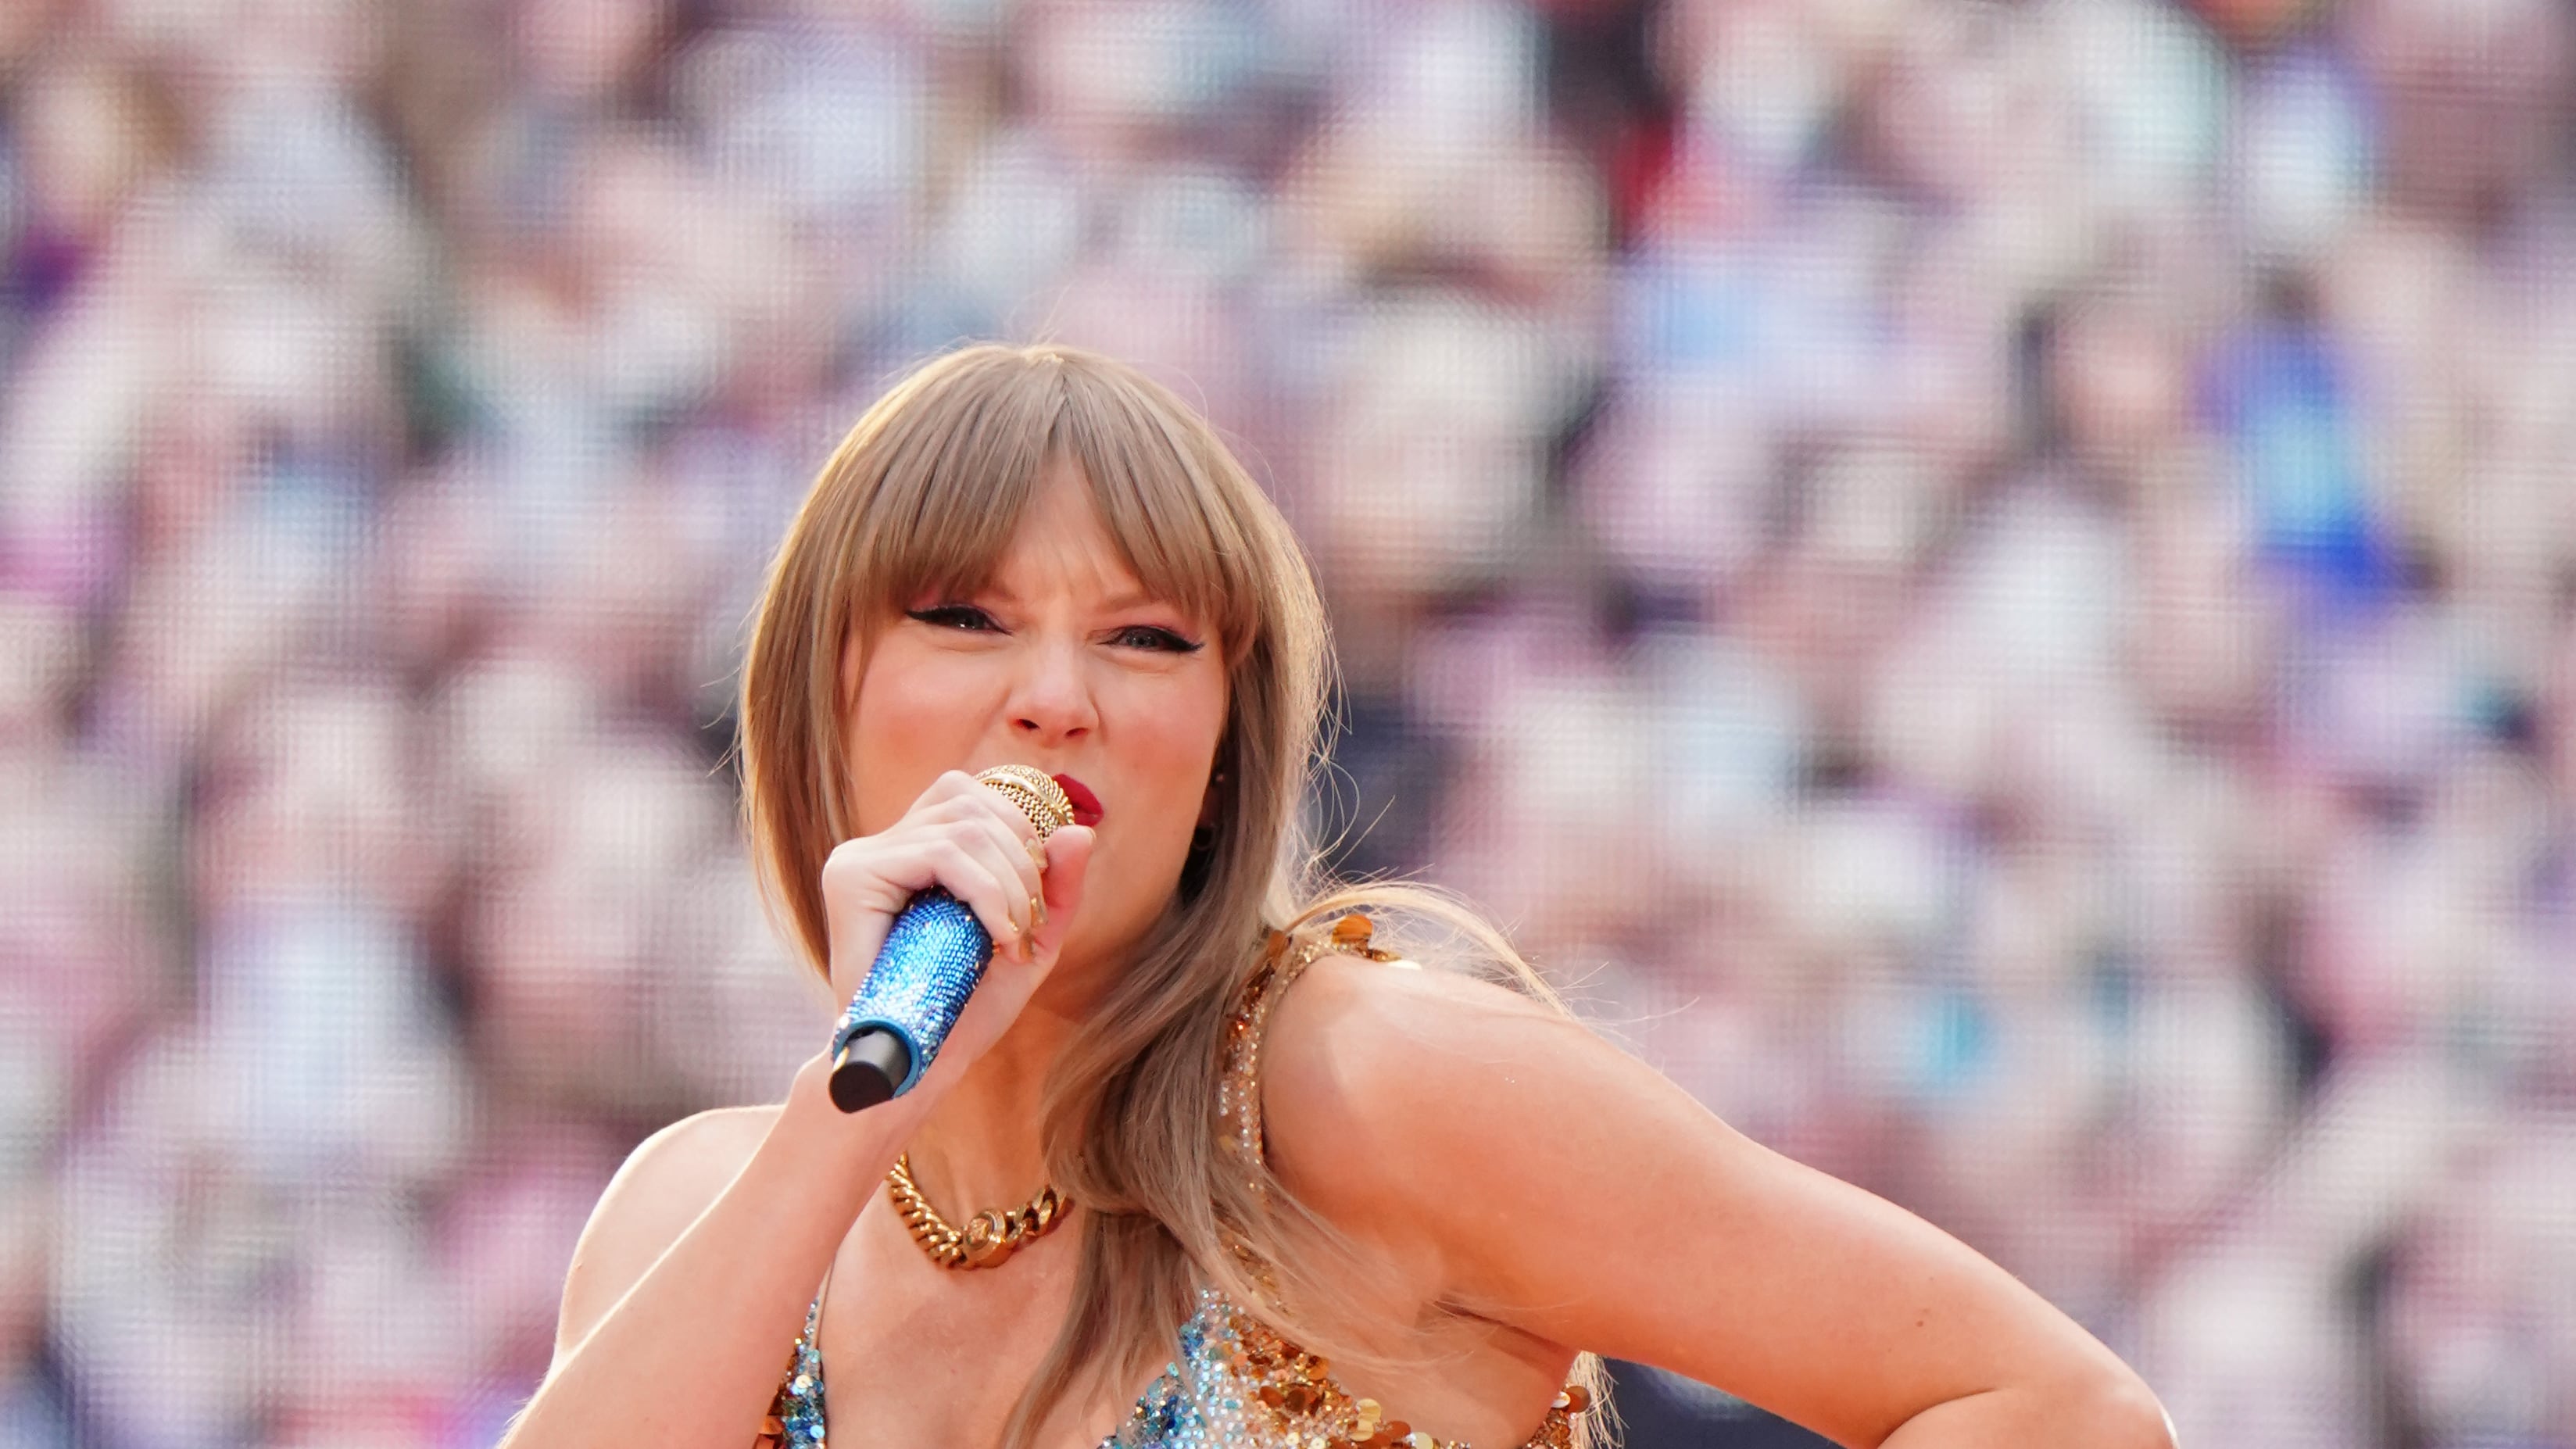 Taylor Swift performed Us with Gracie Abrams on Sunday night at Wembley Stadium